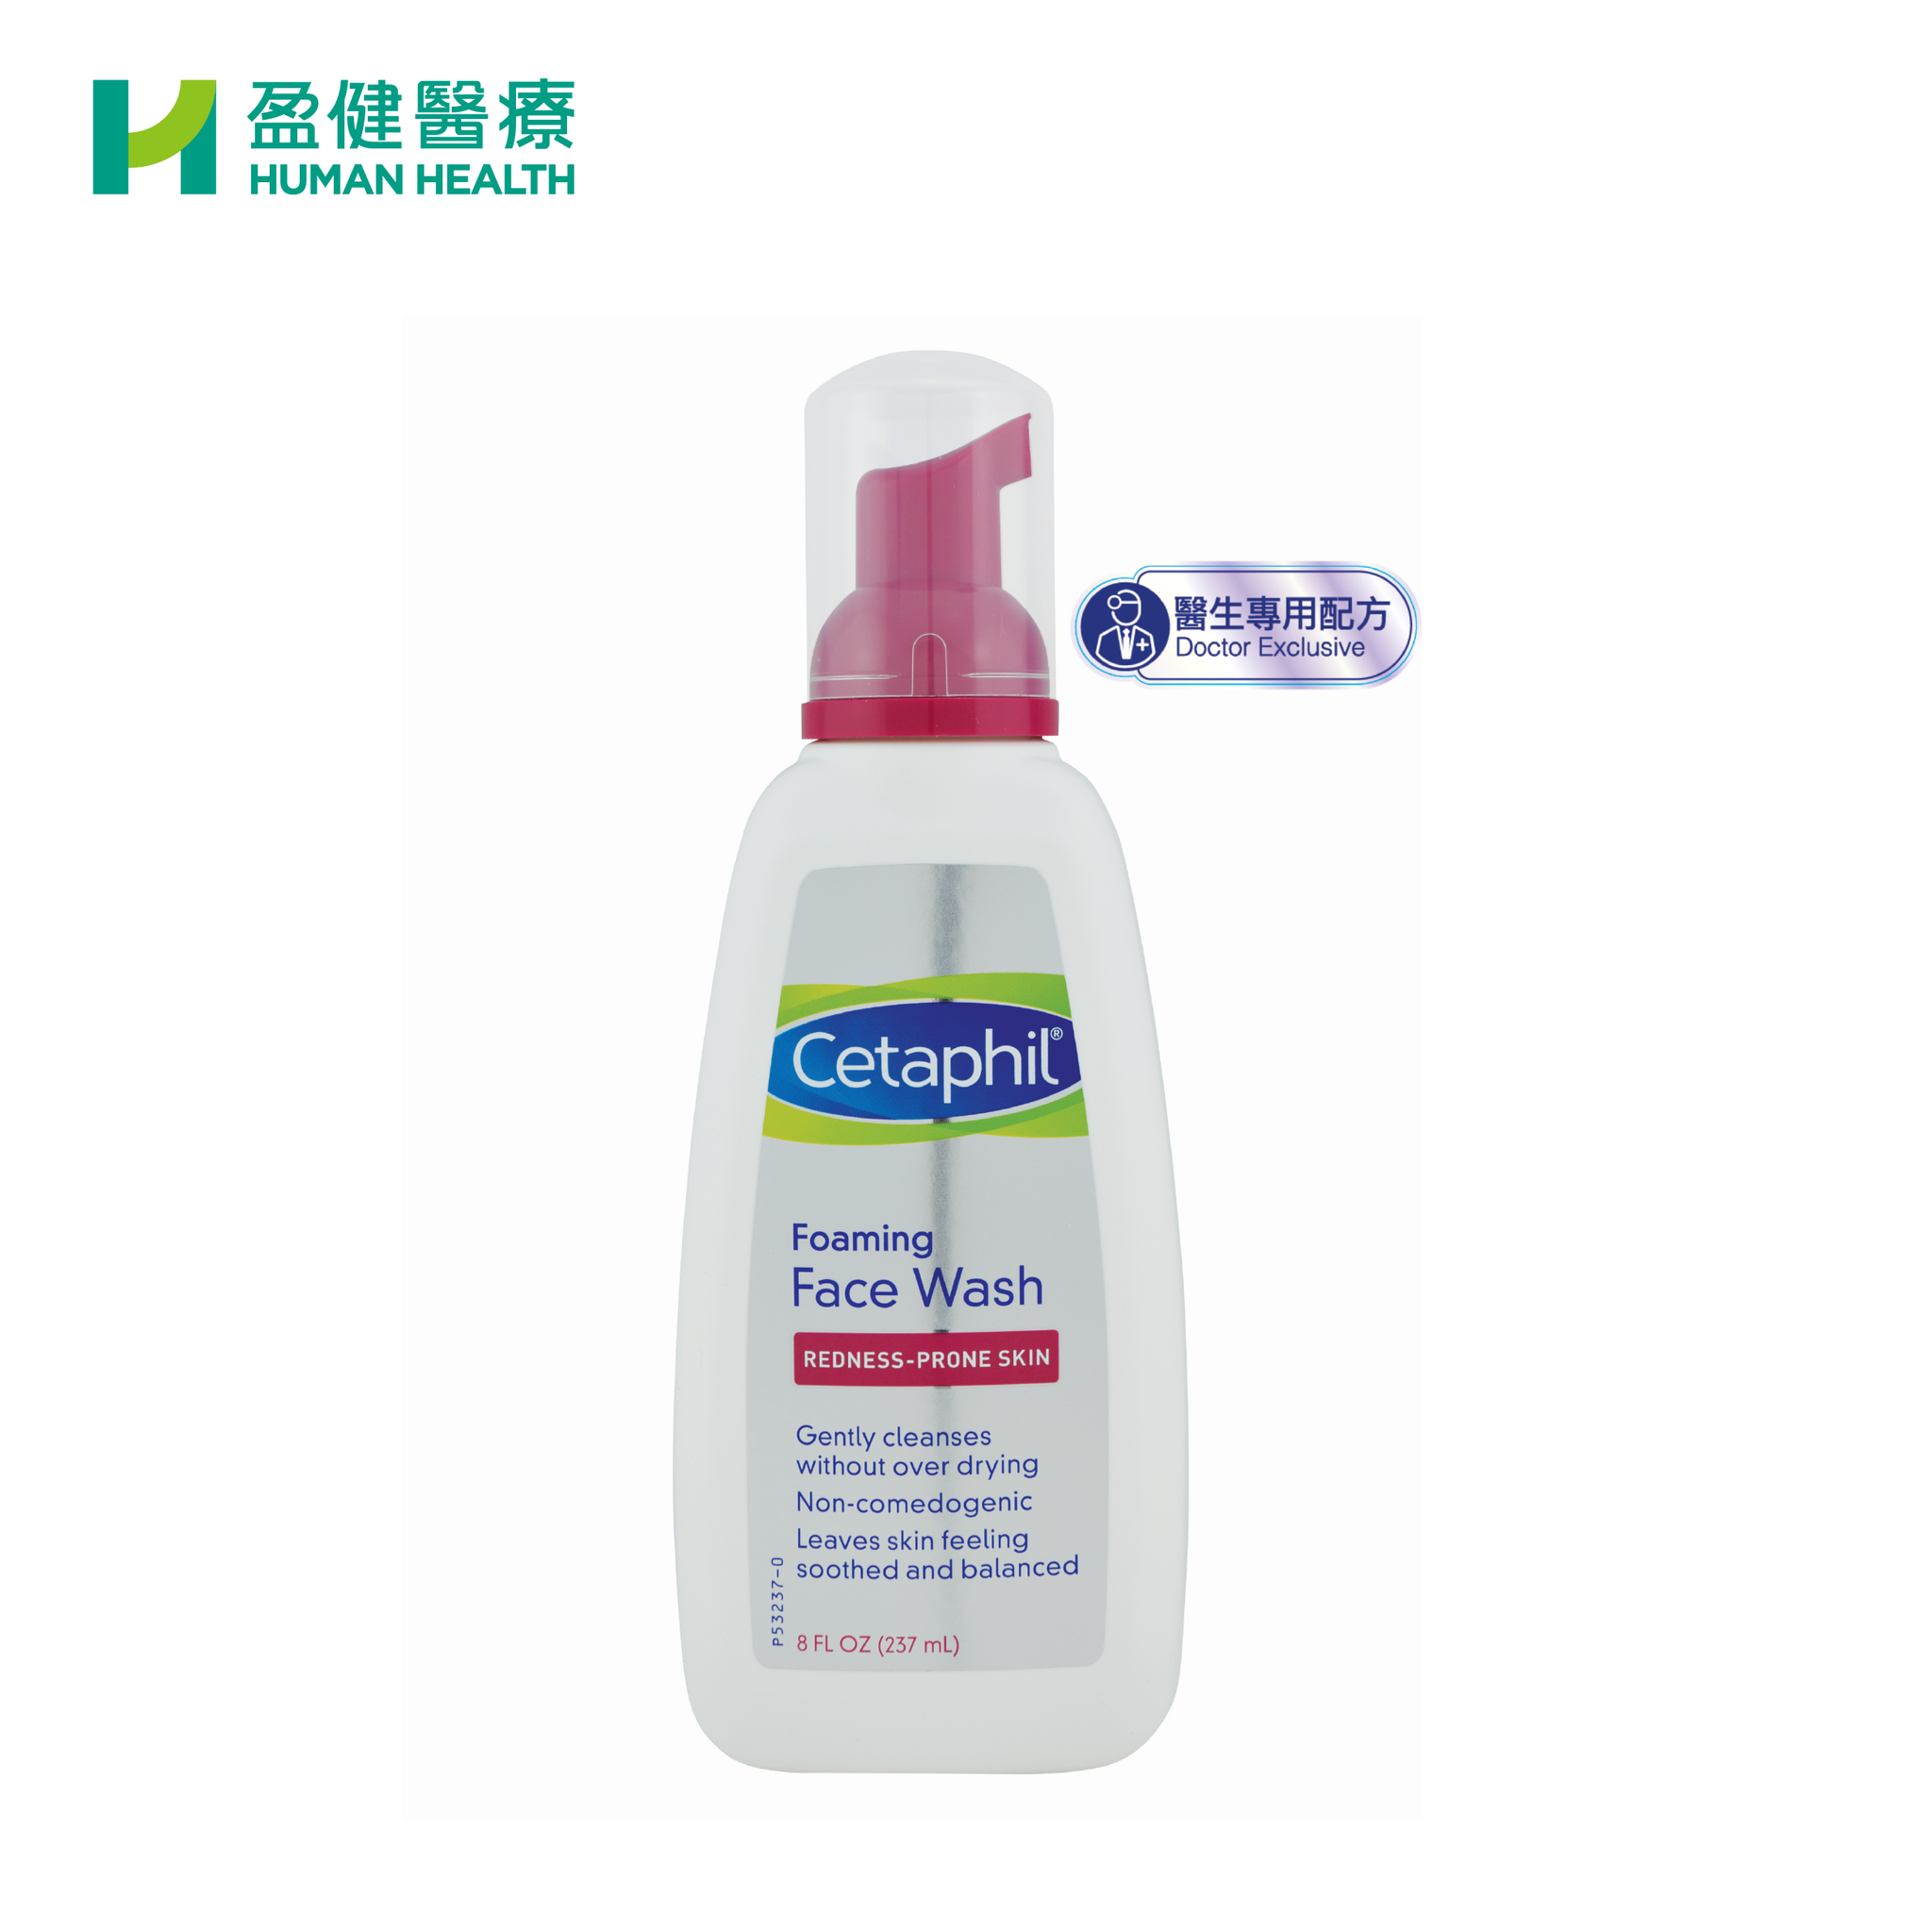 Cetaphil Redness Relieving Foaming Face Wash (H-CETA15)(New/old packaging ships randomly)